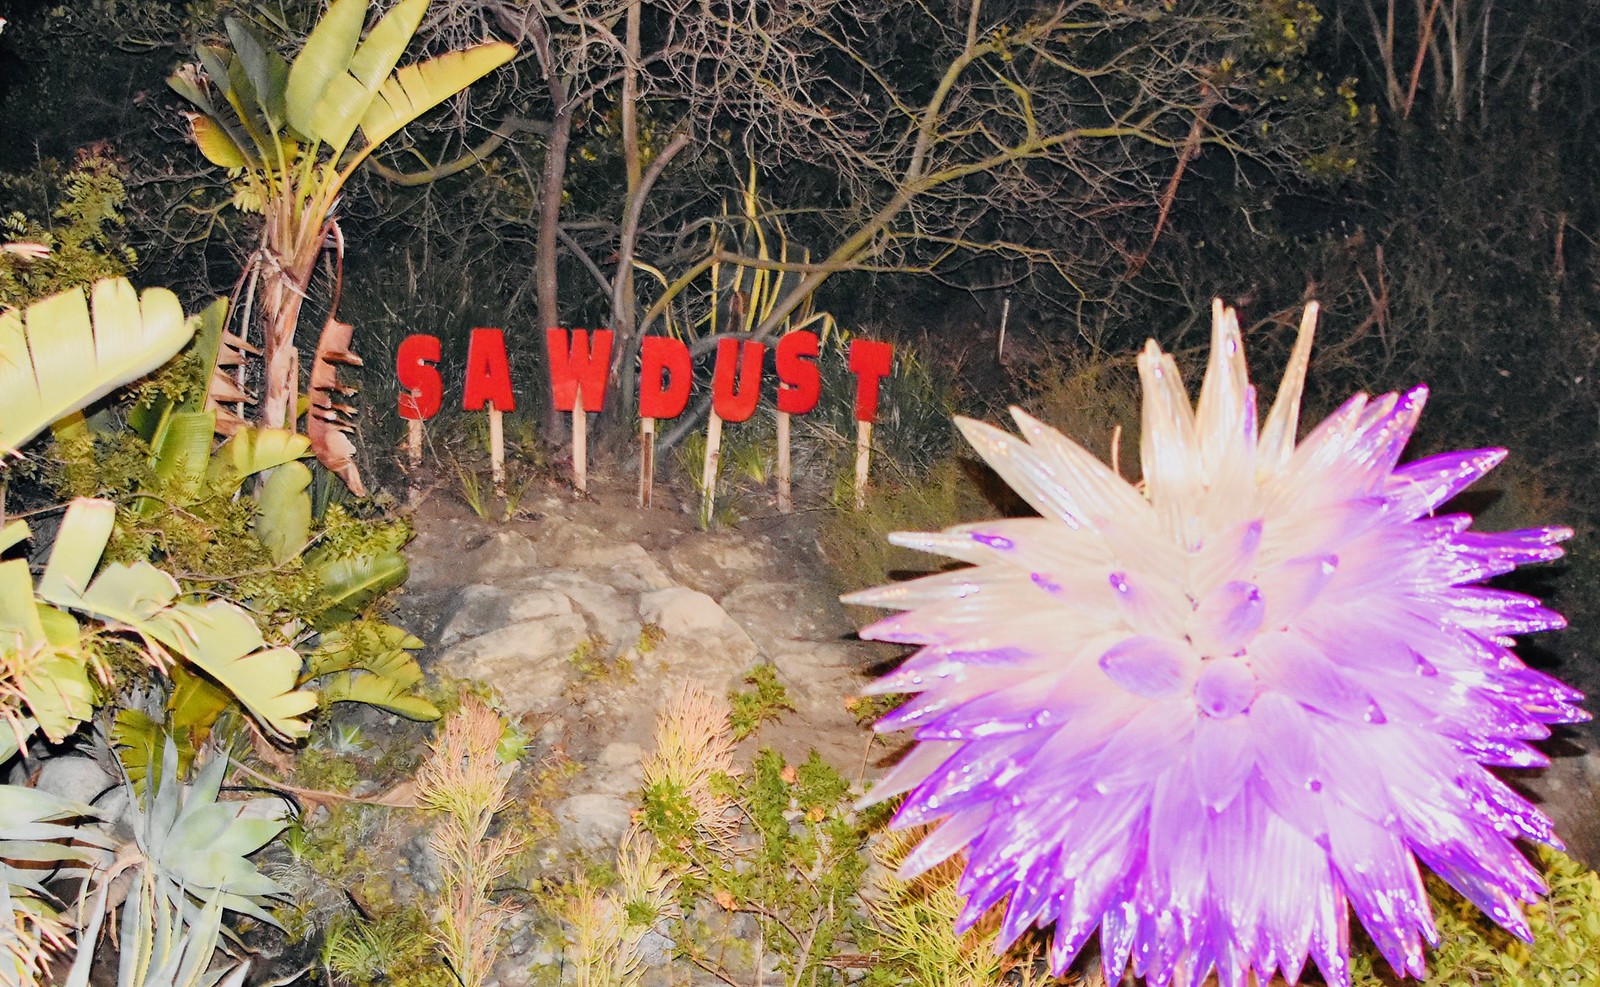 Sawdust Preview Night